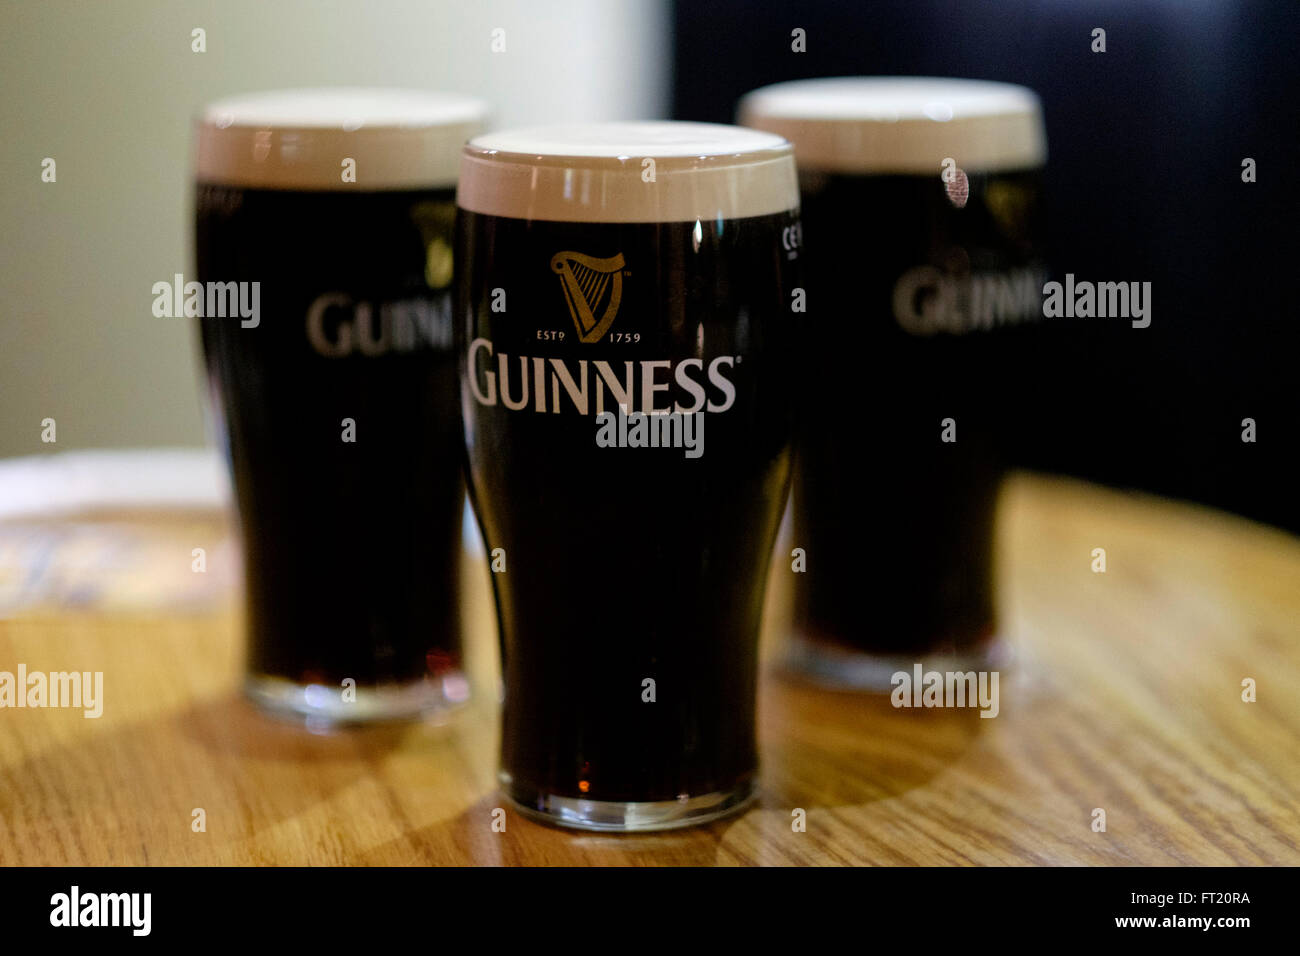 Three pints of Guinness beer Stock Photo